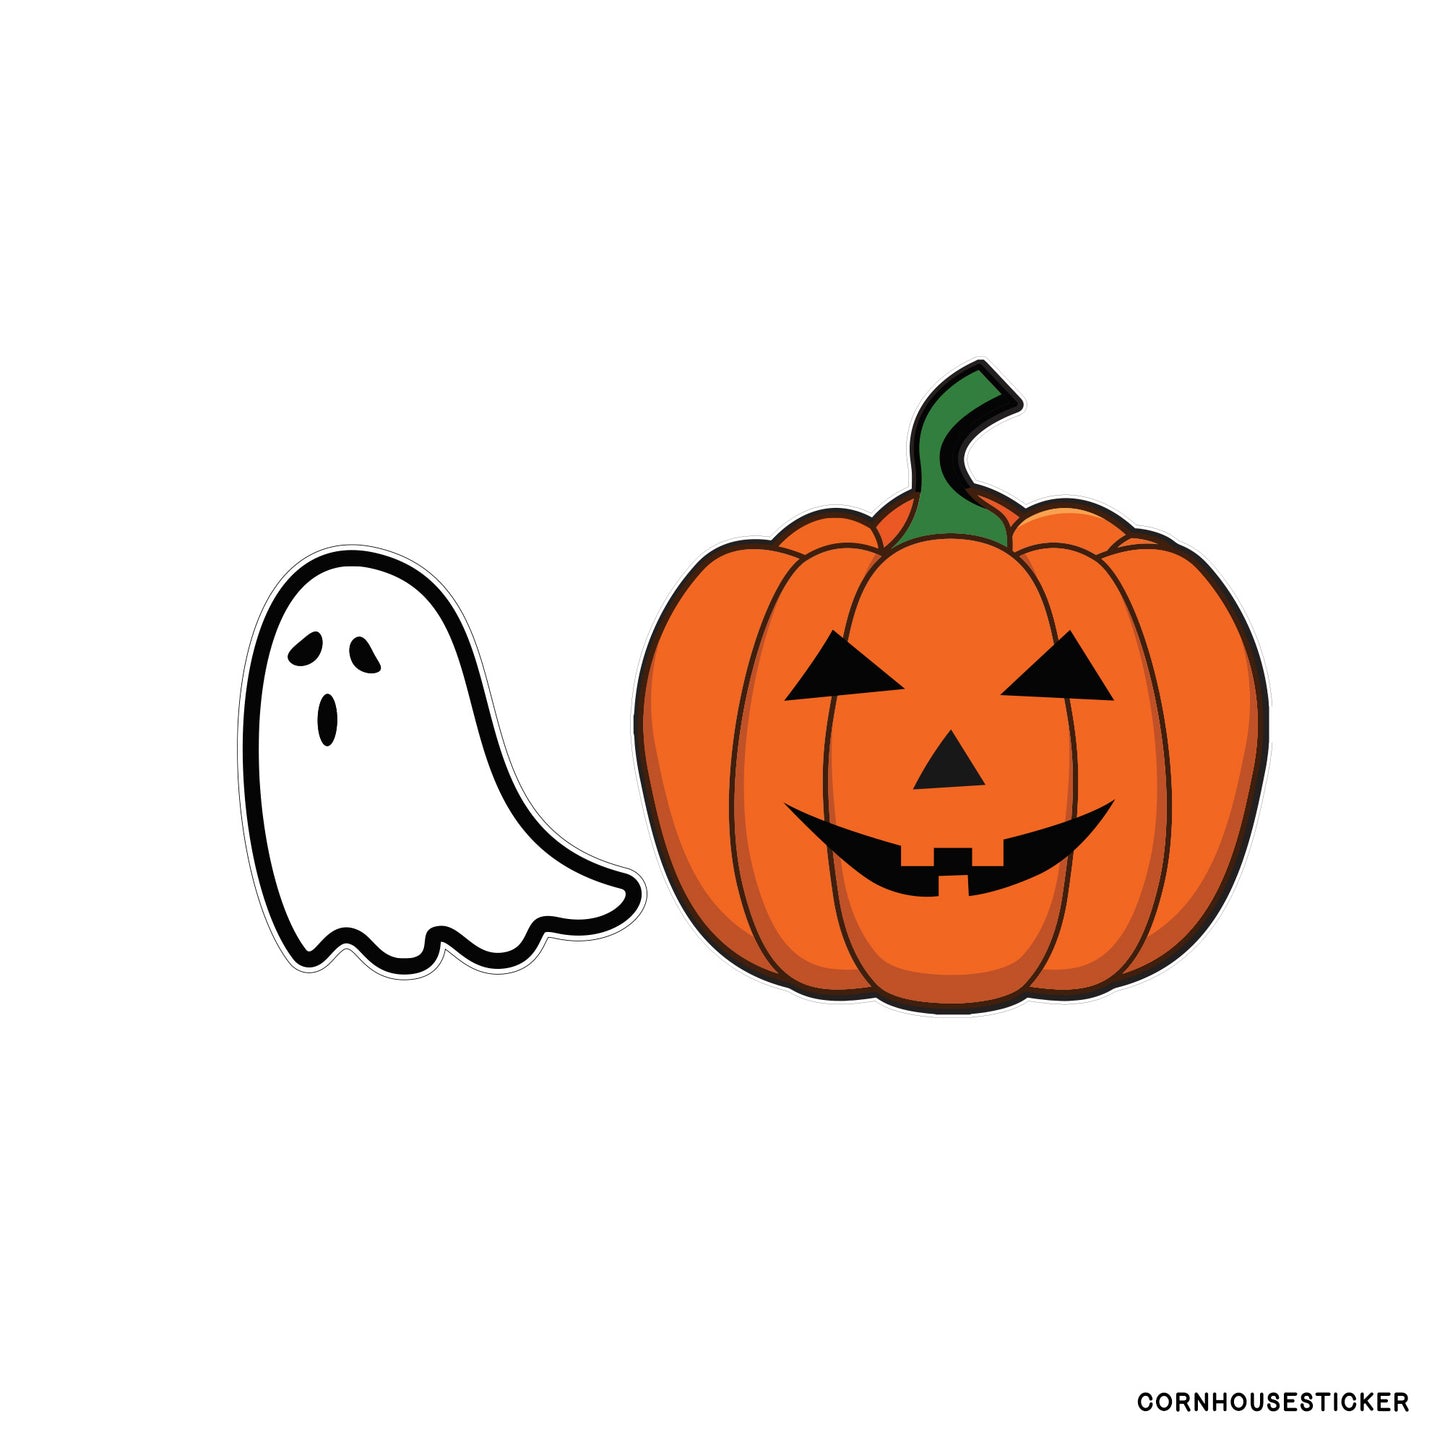 Jack O Lantern and ghost sticker pack!